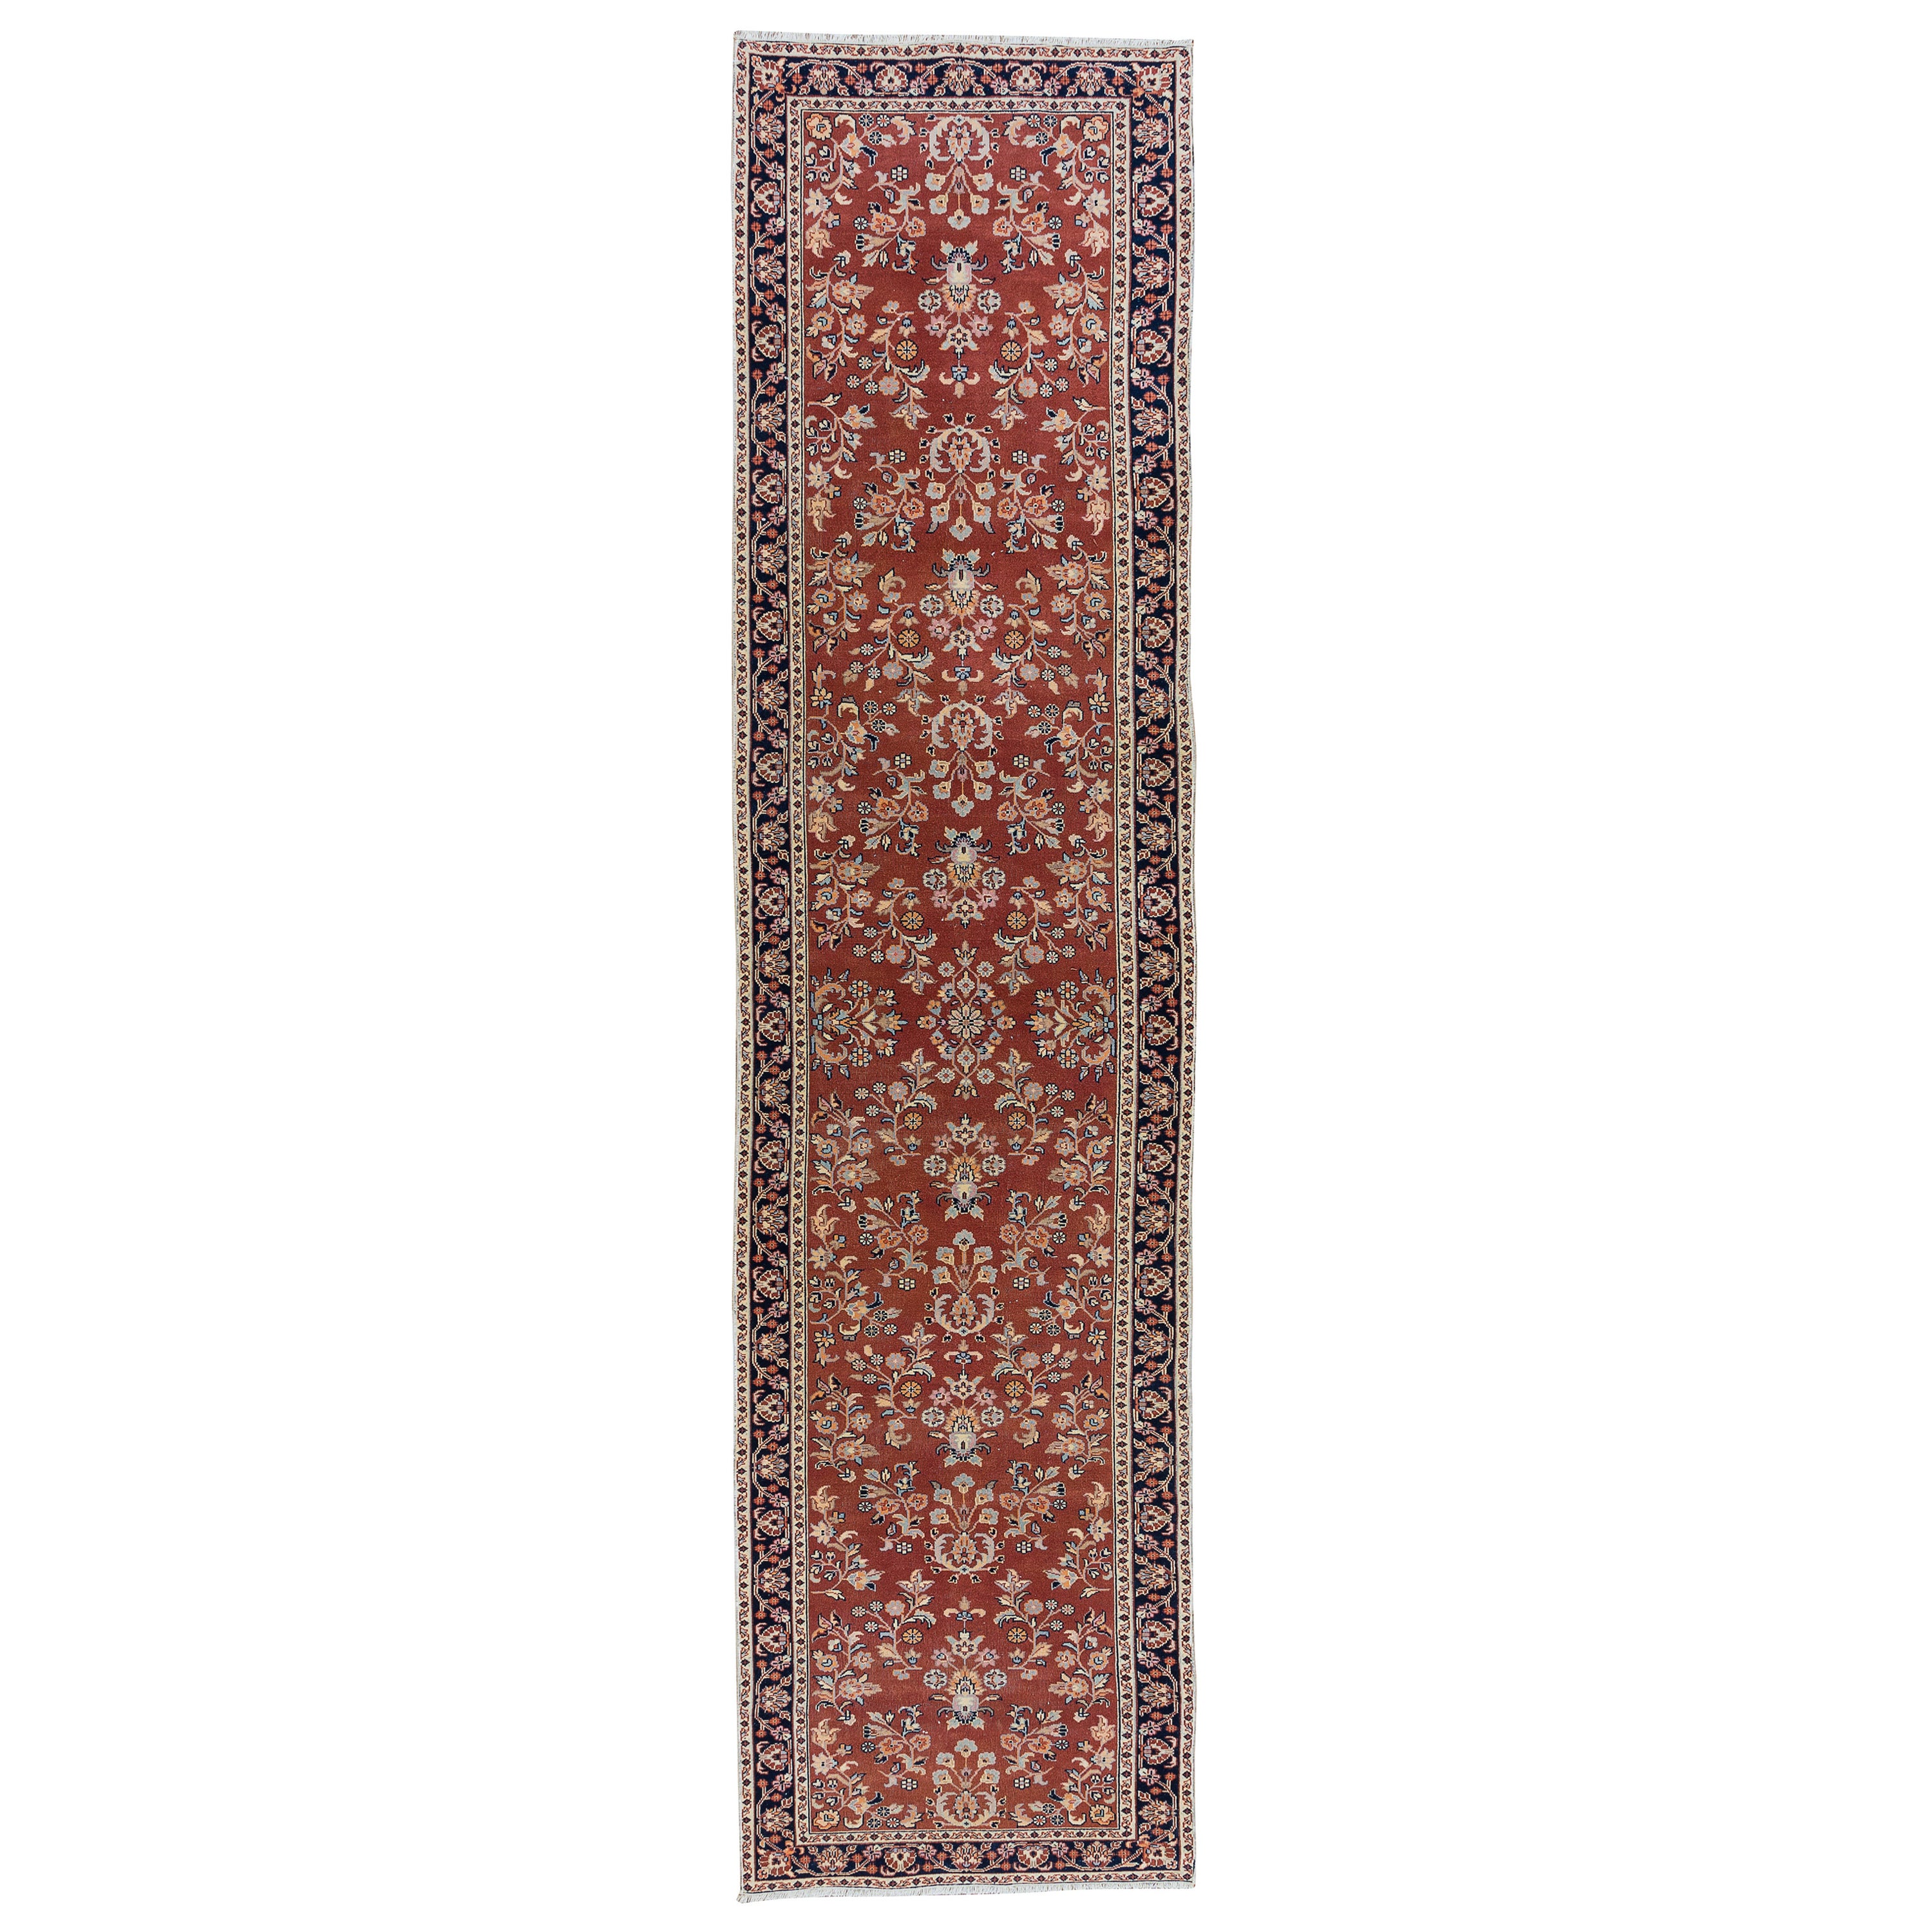 2.6x11.4 Ft Turkish Vintage Hand Knotted Hallway Runner Rug with Floral Motif For Sale